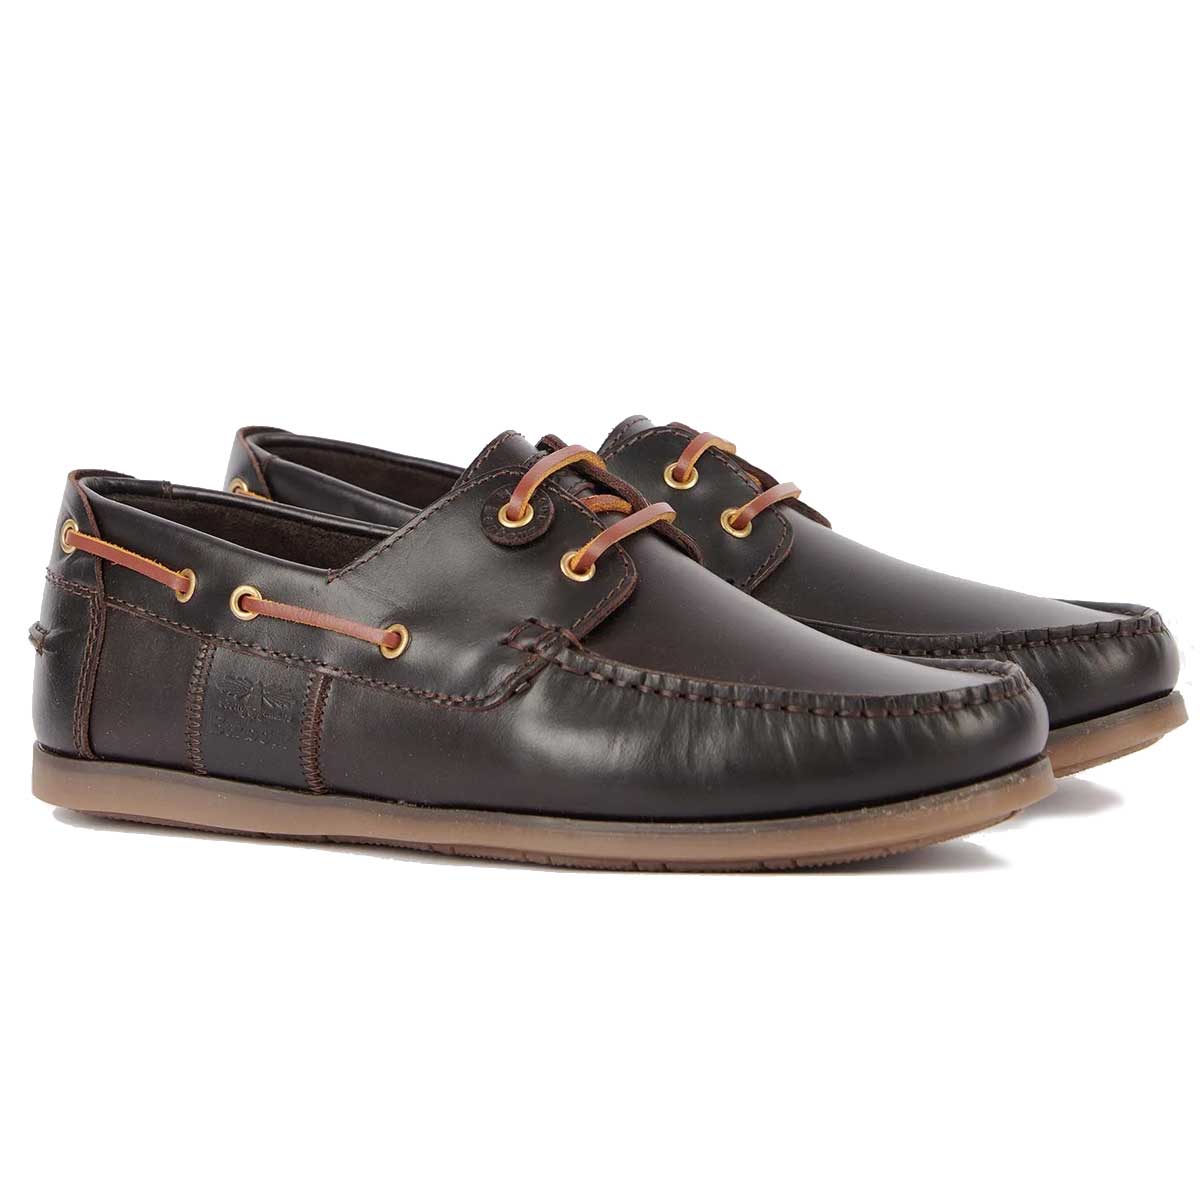 BARBOUR Capstan Boat Shoes - Mens Leather - Dark Brown